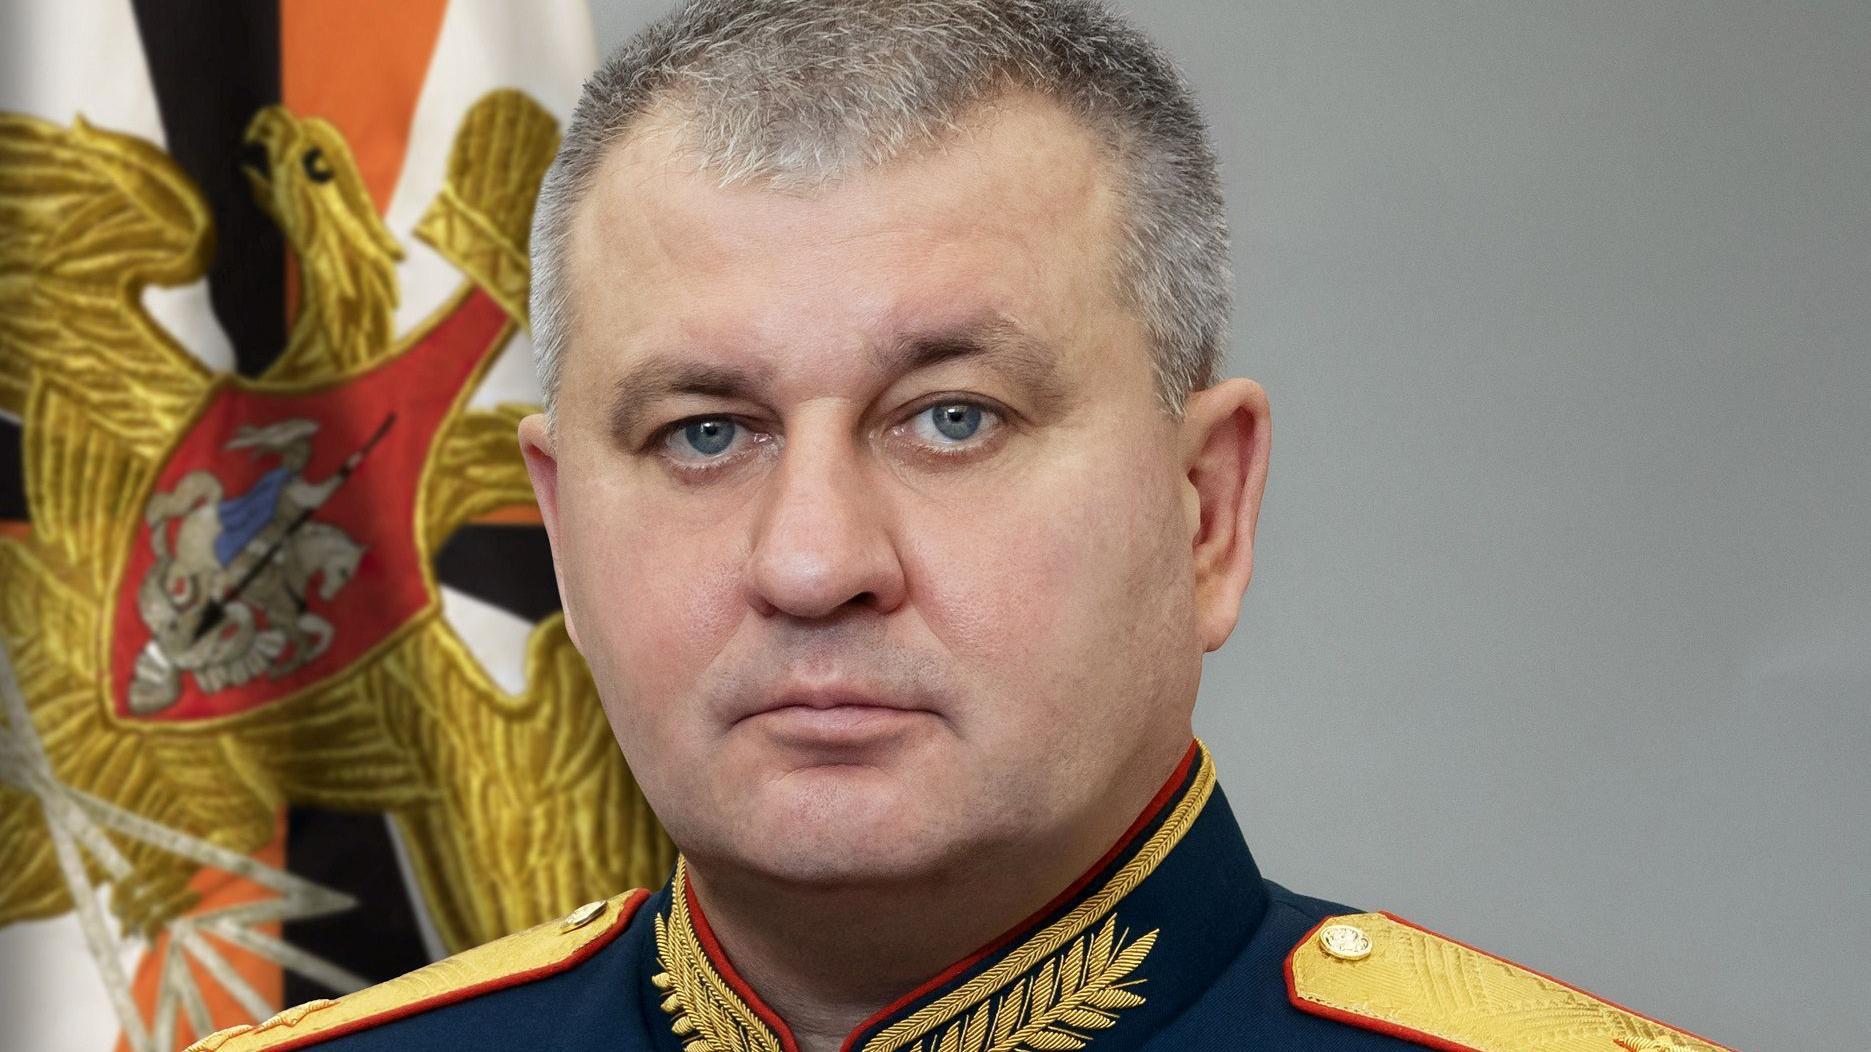 Top Russian general fired amid bribery allegations